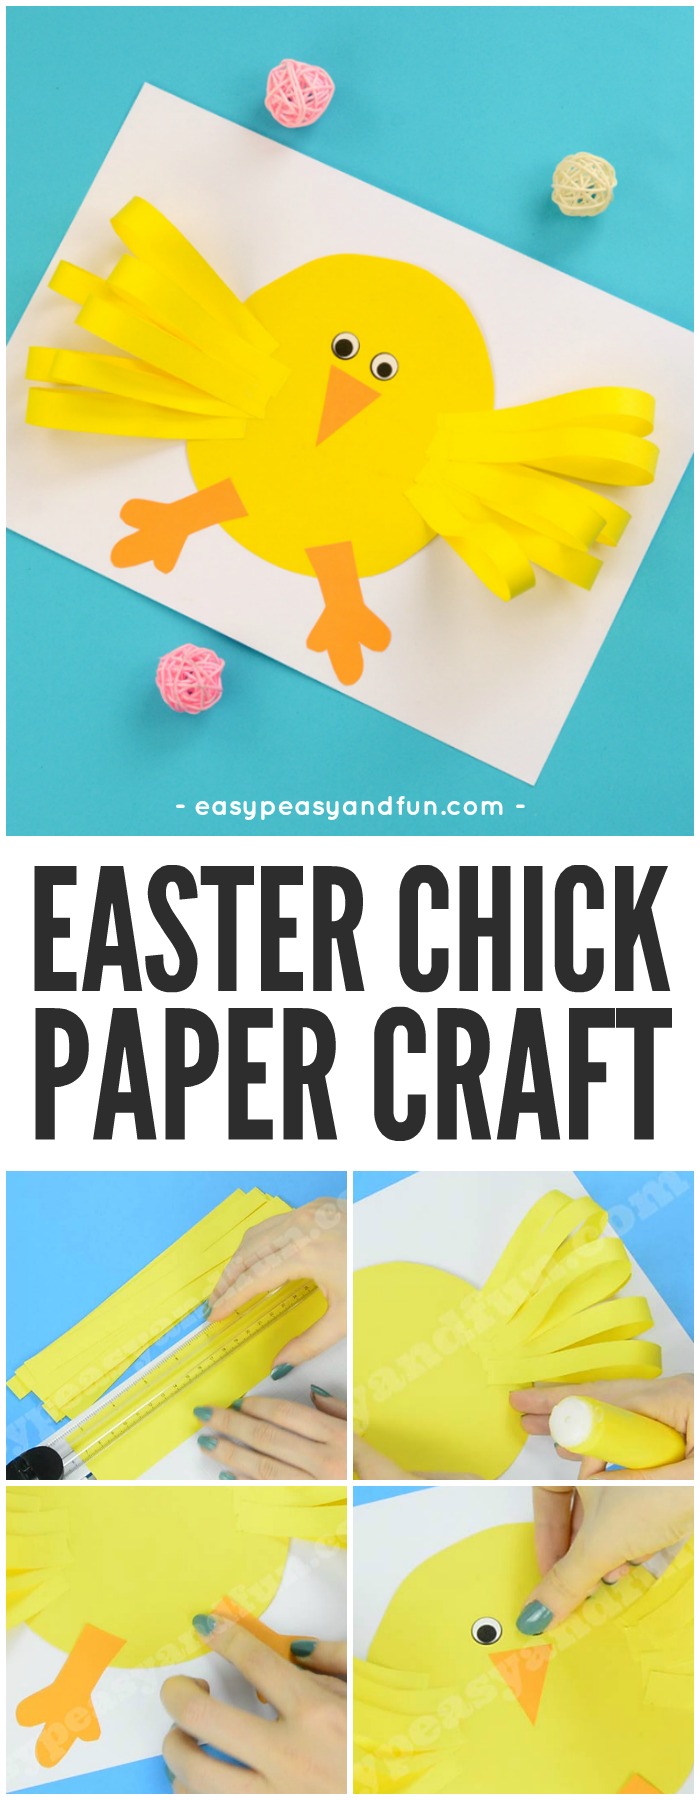 Cute Easter Chick Paper Craft Idea for Kids #Eastercrafts #chickcrafts #papercraftsforkids